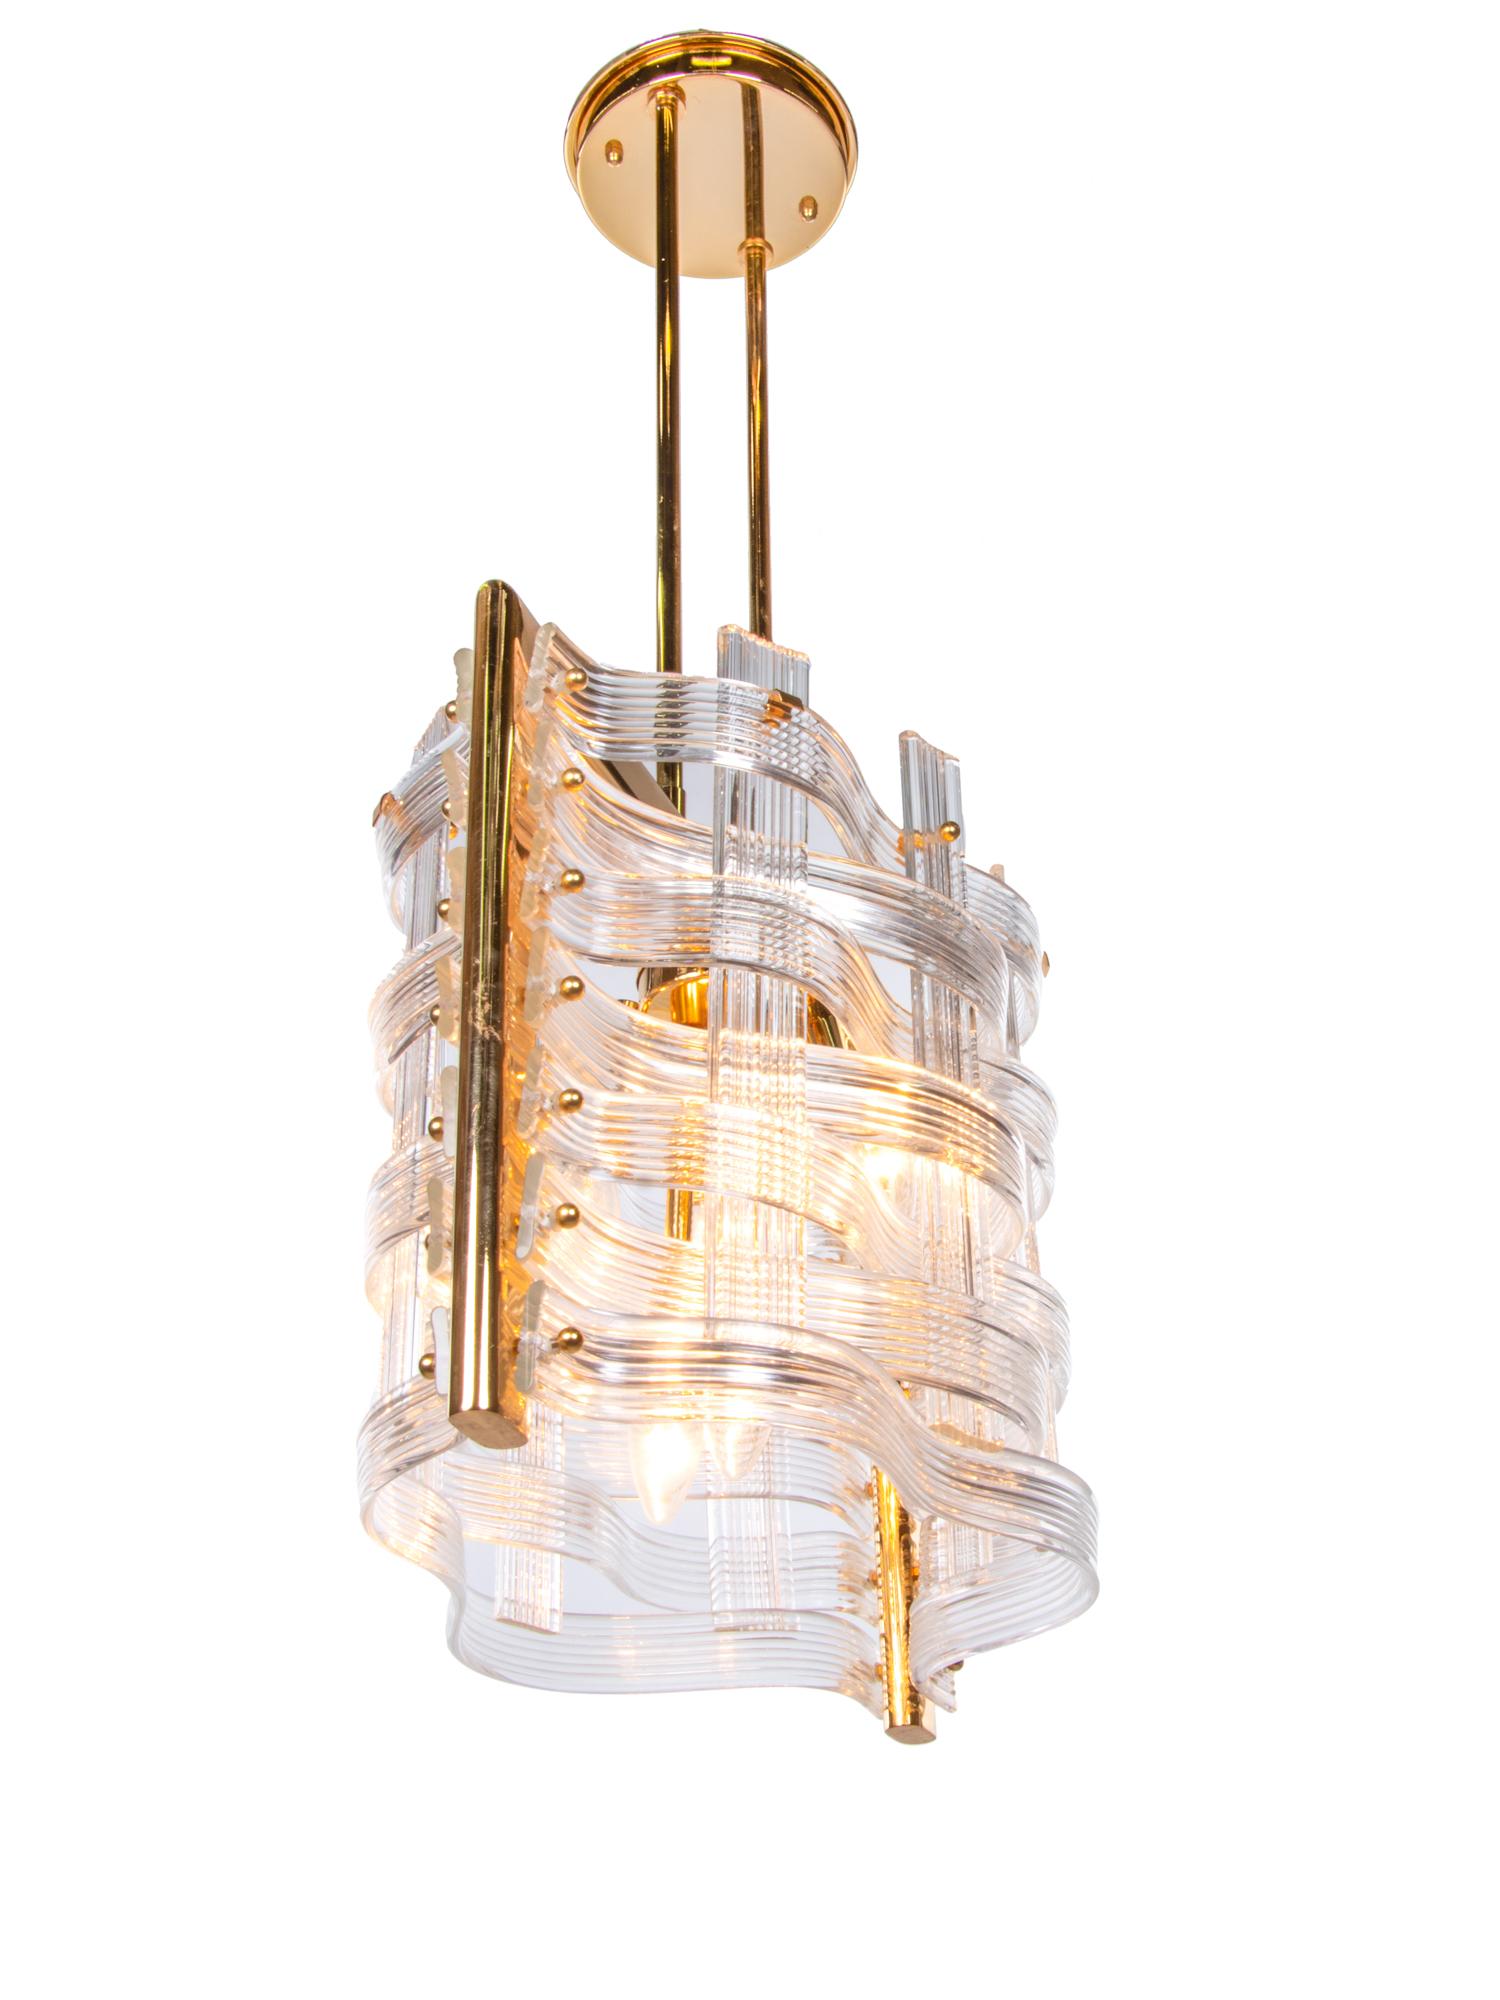 Elegant 'Nastri' chandelier from Venini with clear wave-shaped Murano glass ribbons on a gold-plated brass fitting. This wonderful and very elegant mid-century ceiling light has an incomparably unique character. Chandelier illuminates beautifully